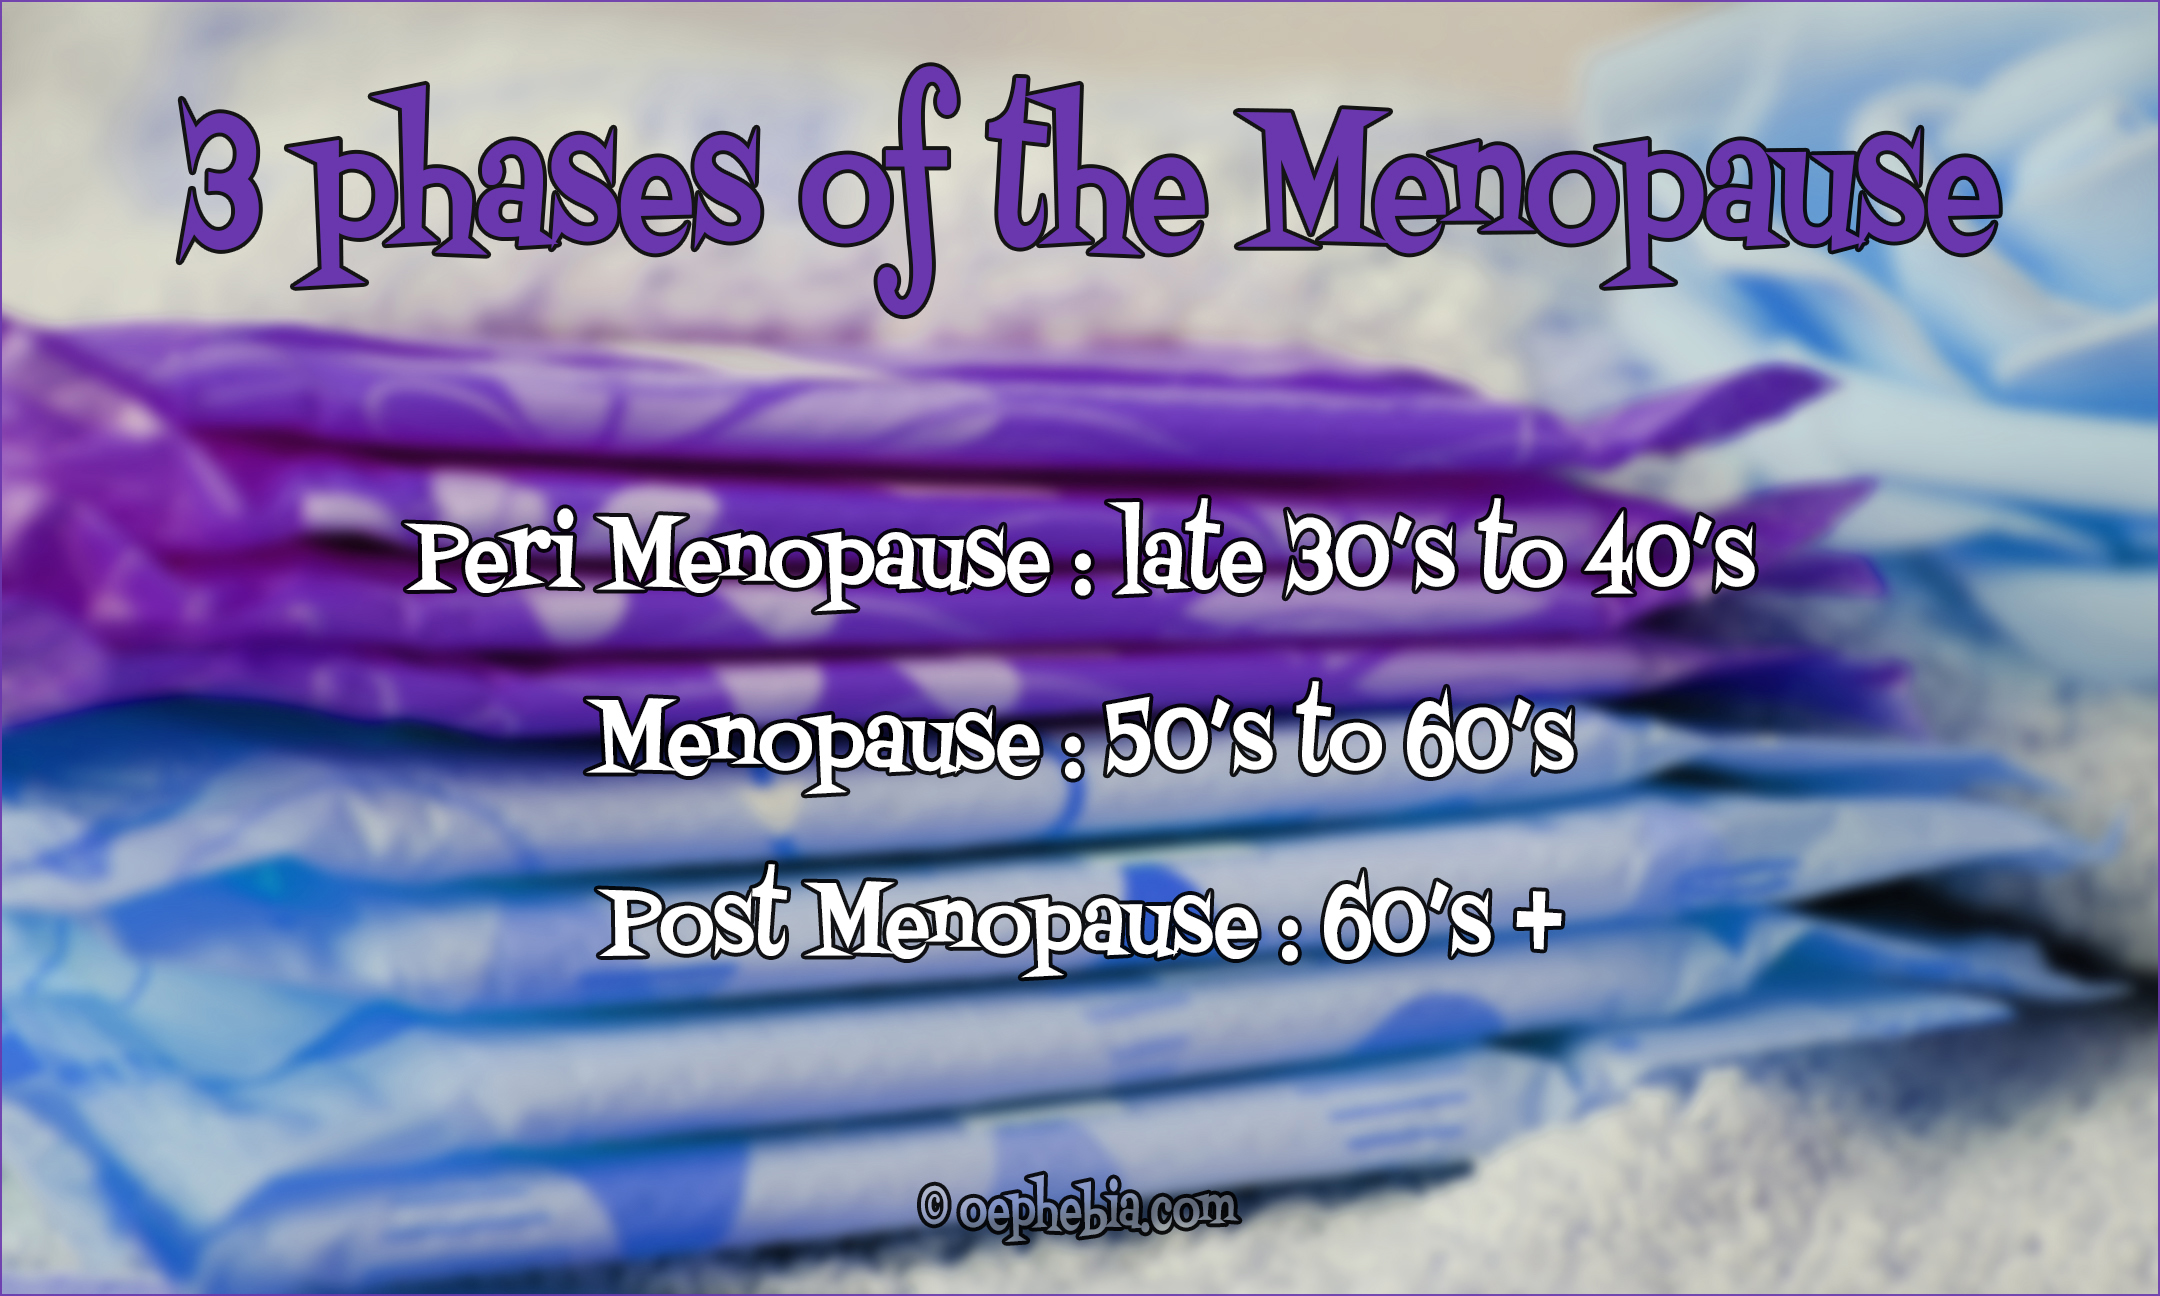 3 phases of the menopause